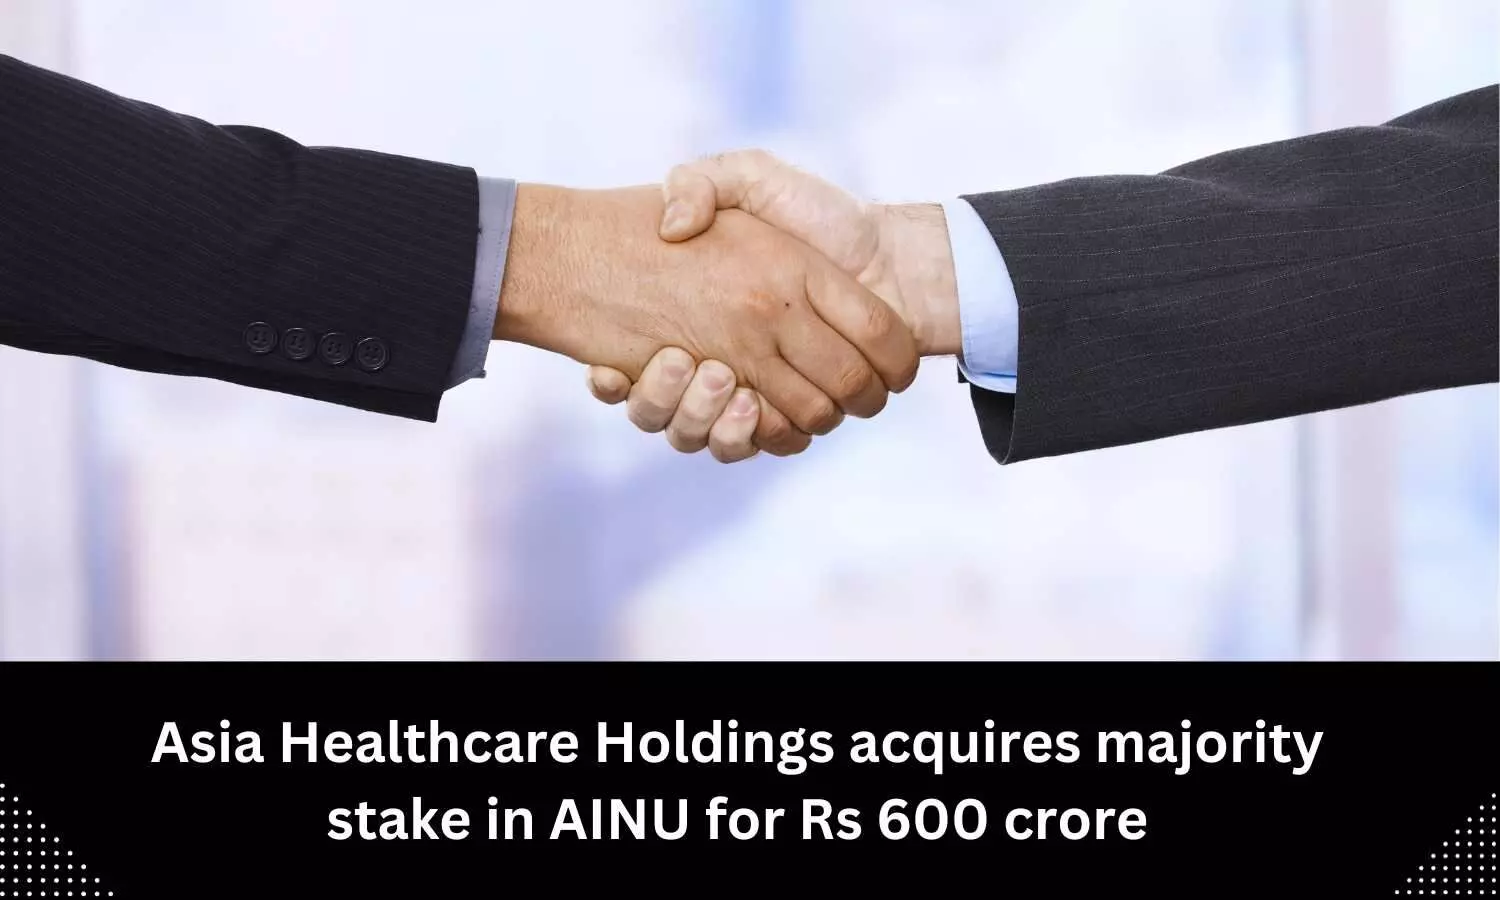 AINU sells majority stake to Asia Healthcare Holdings for Rs 600 crore